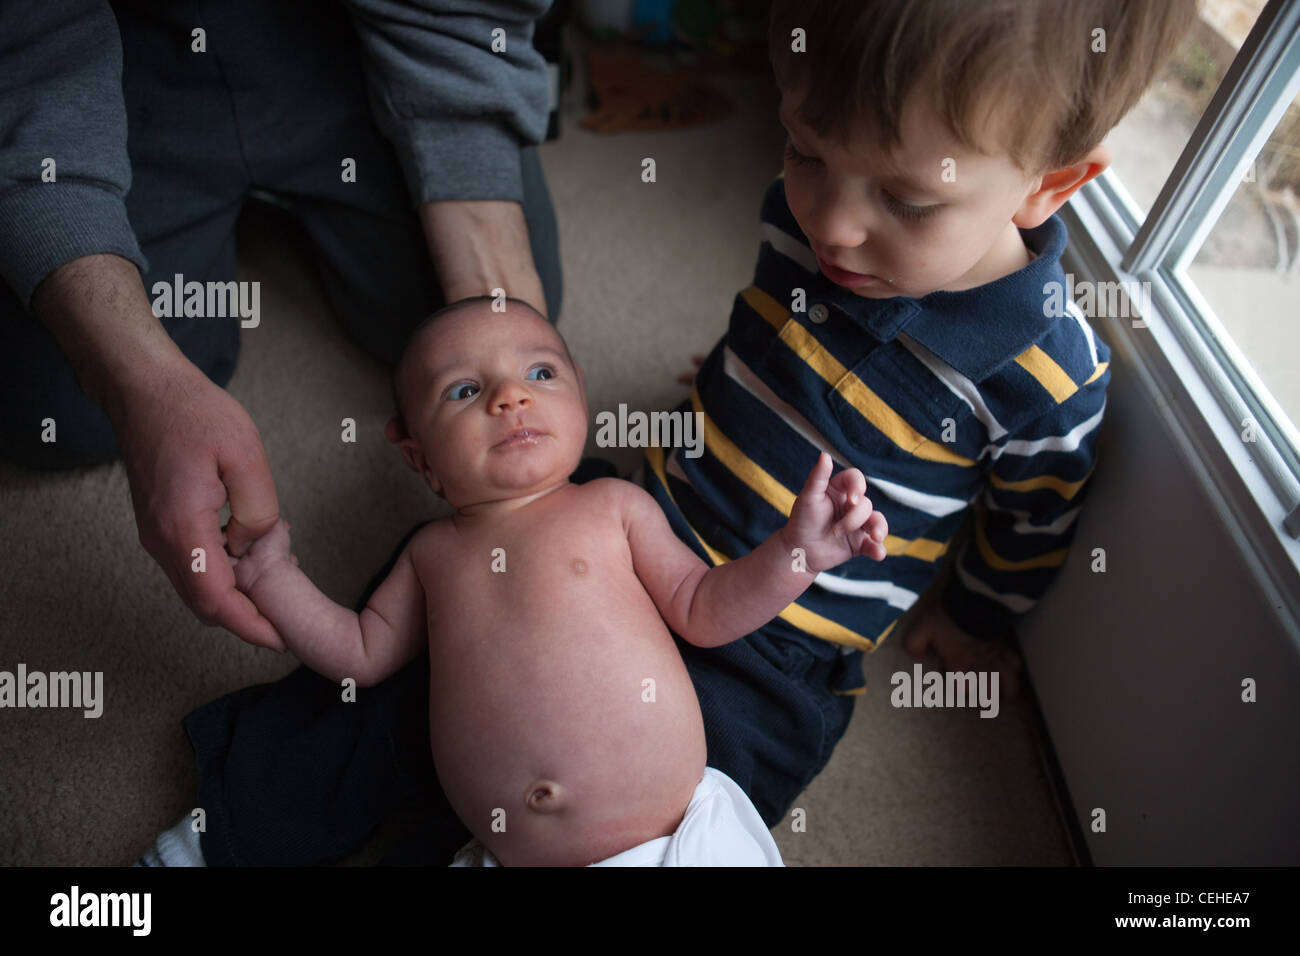 Father trying to get his two year old son to hold his new baby sister, but the brother does not want the baby in his lap. Stock Photo